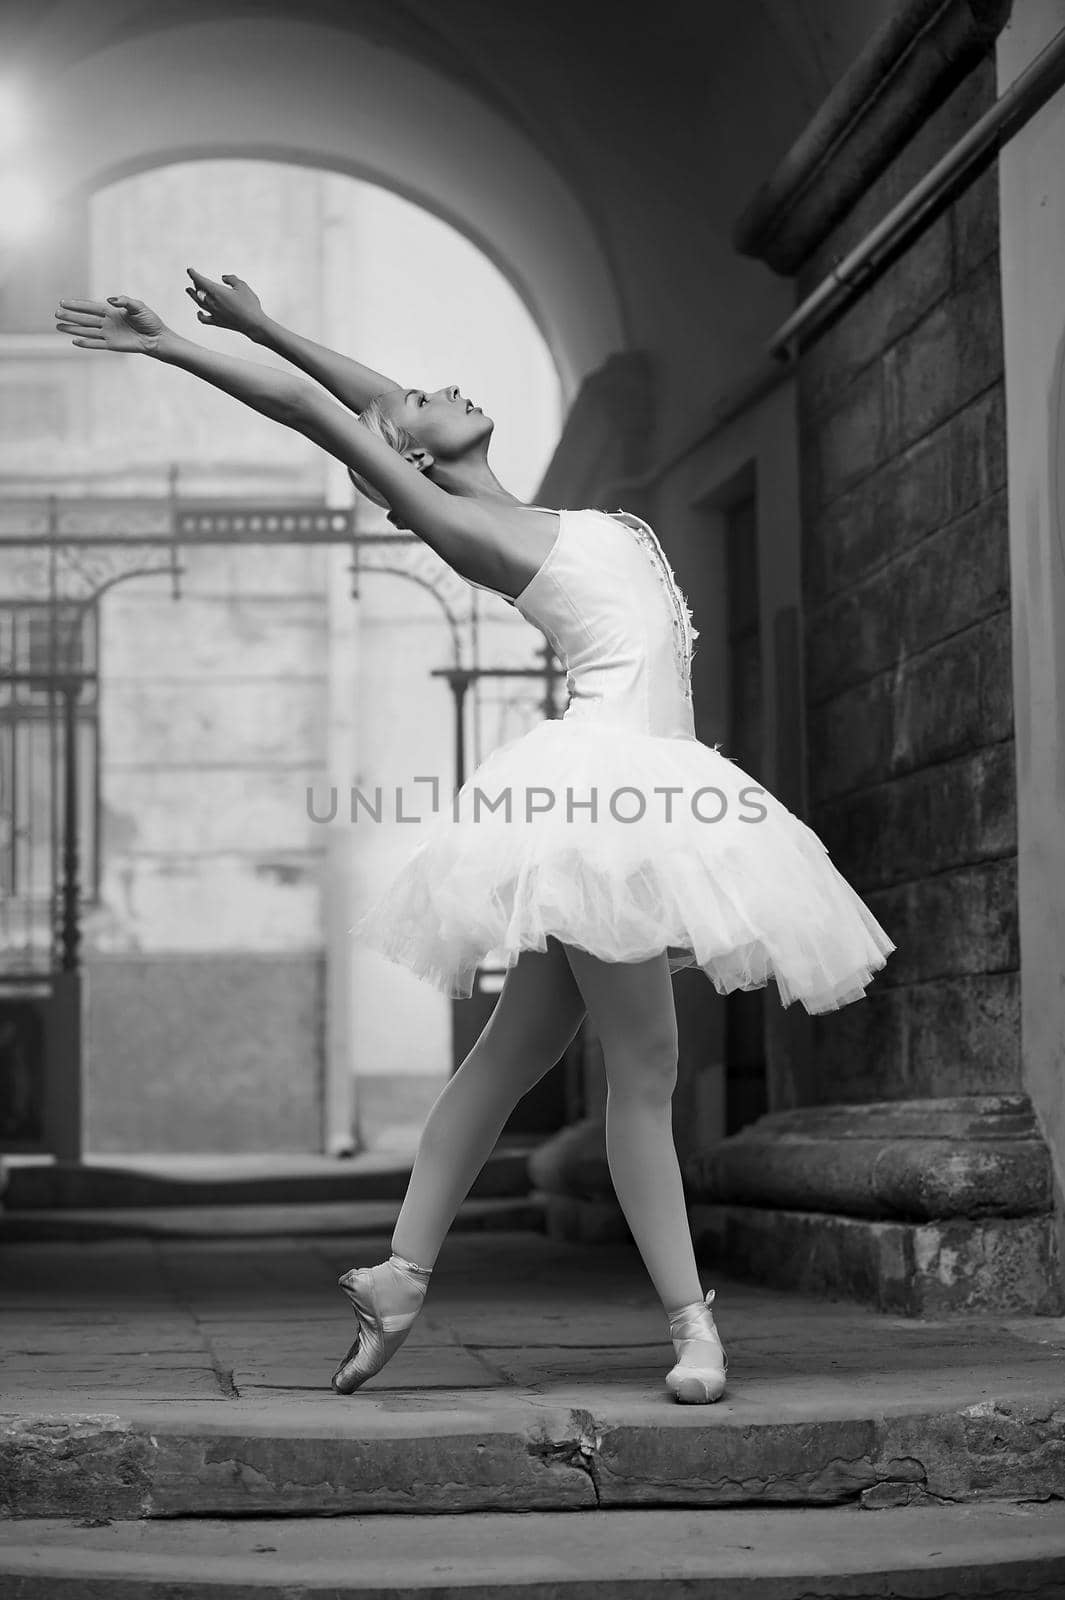 Bringing dance to the city. Monochrome portrait of a woman dancing ballet near an old arch